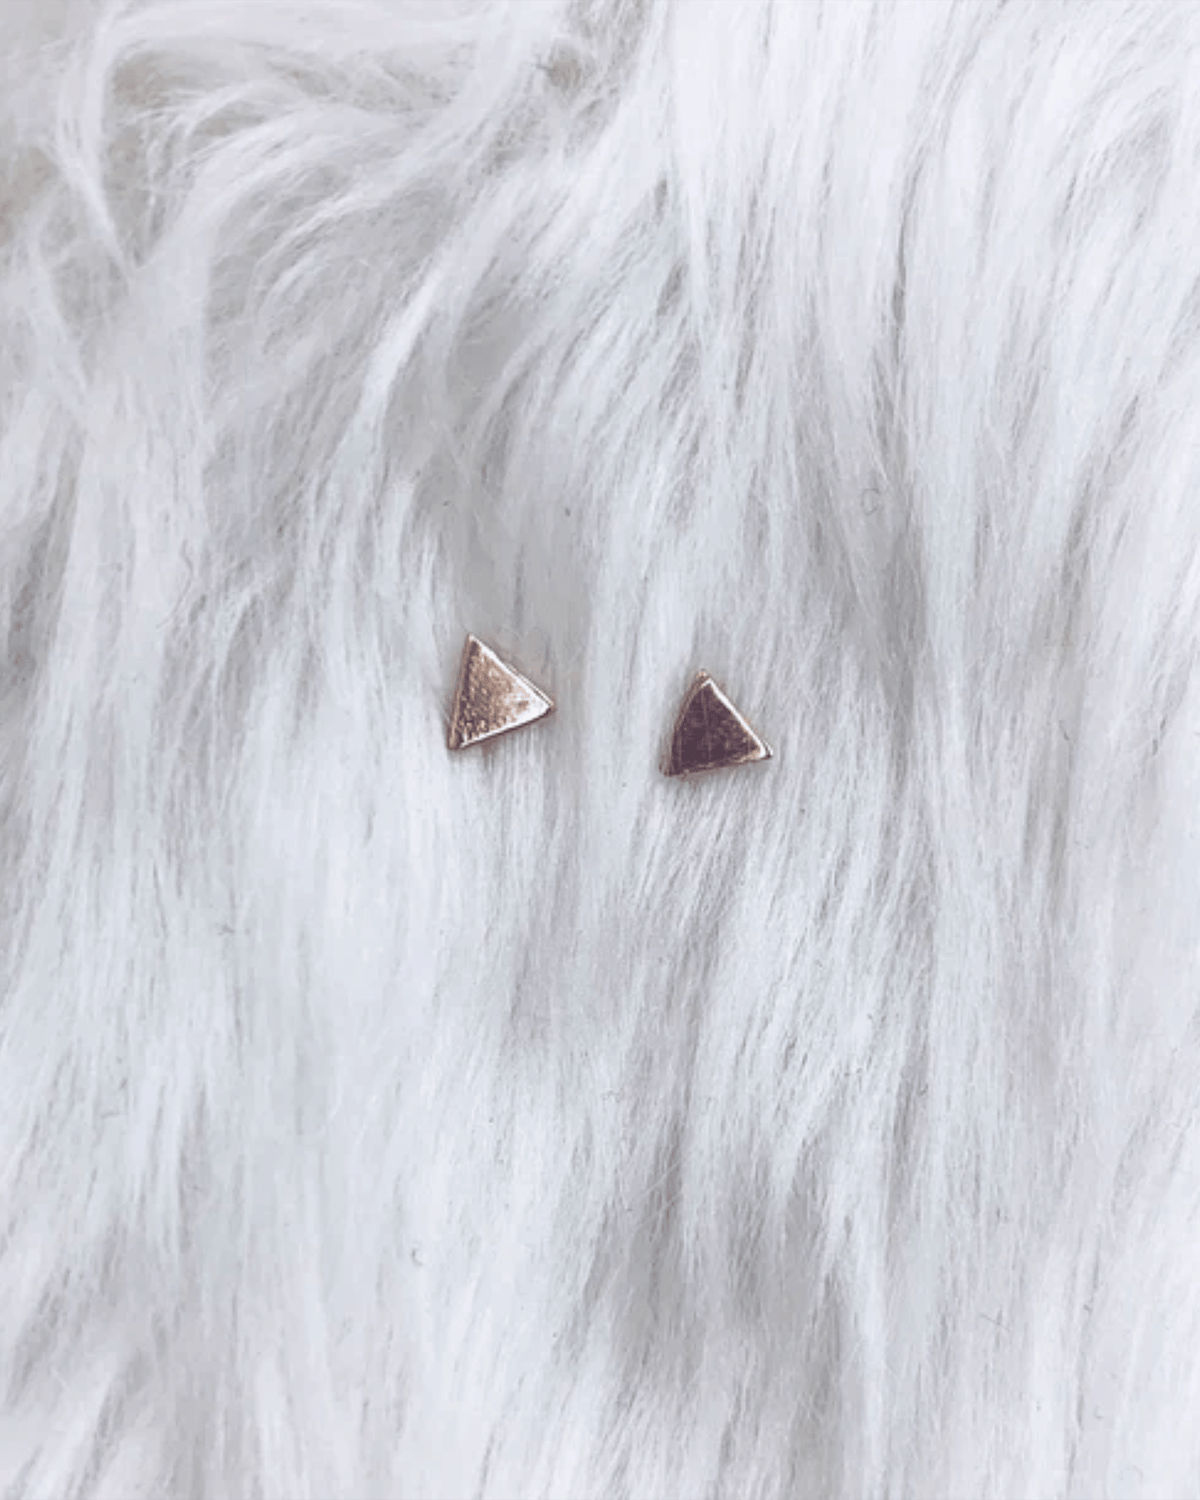 Nashelle Lucky Mini Triangle Posts in Silver